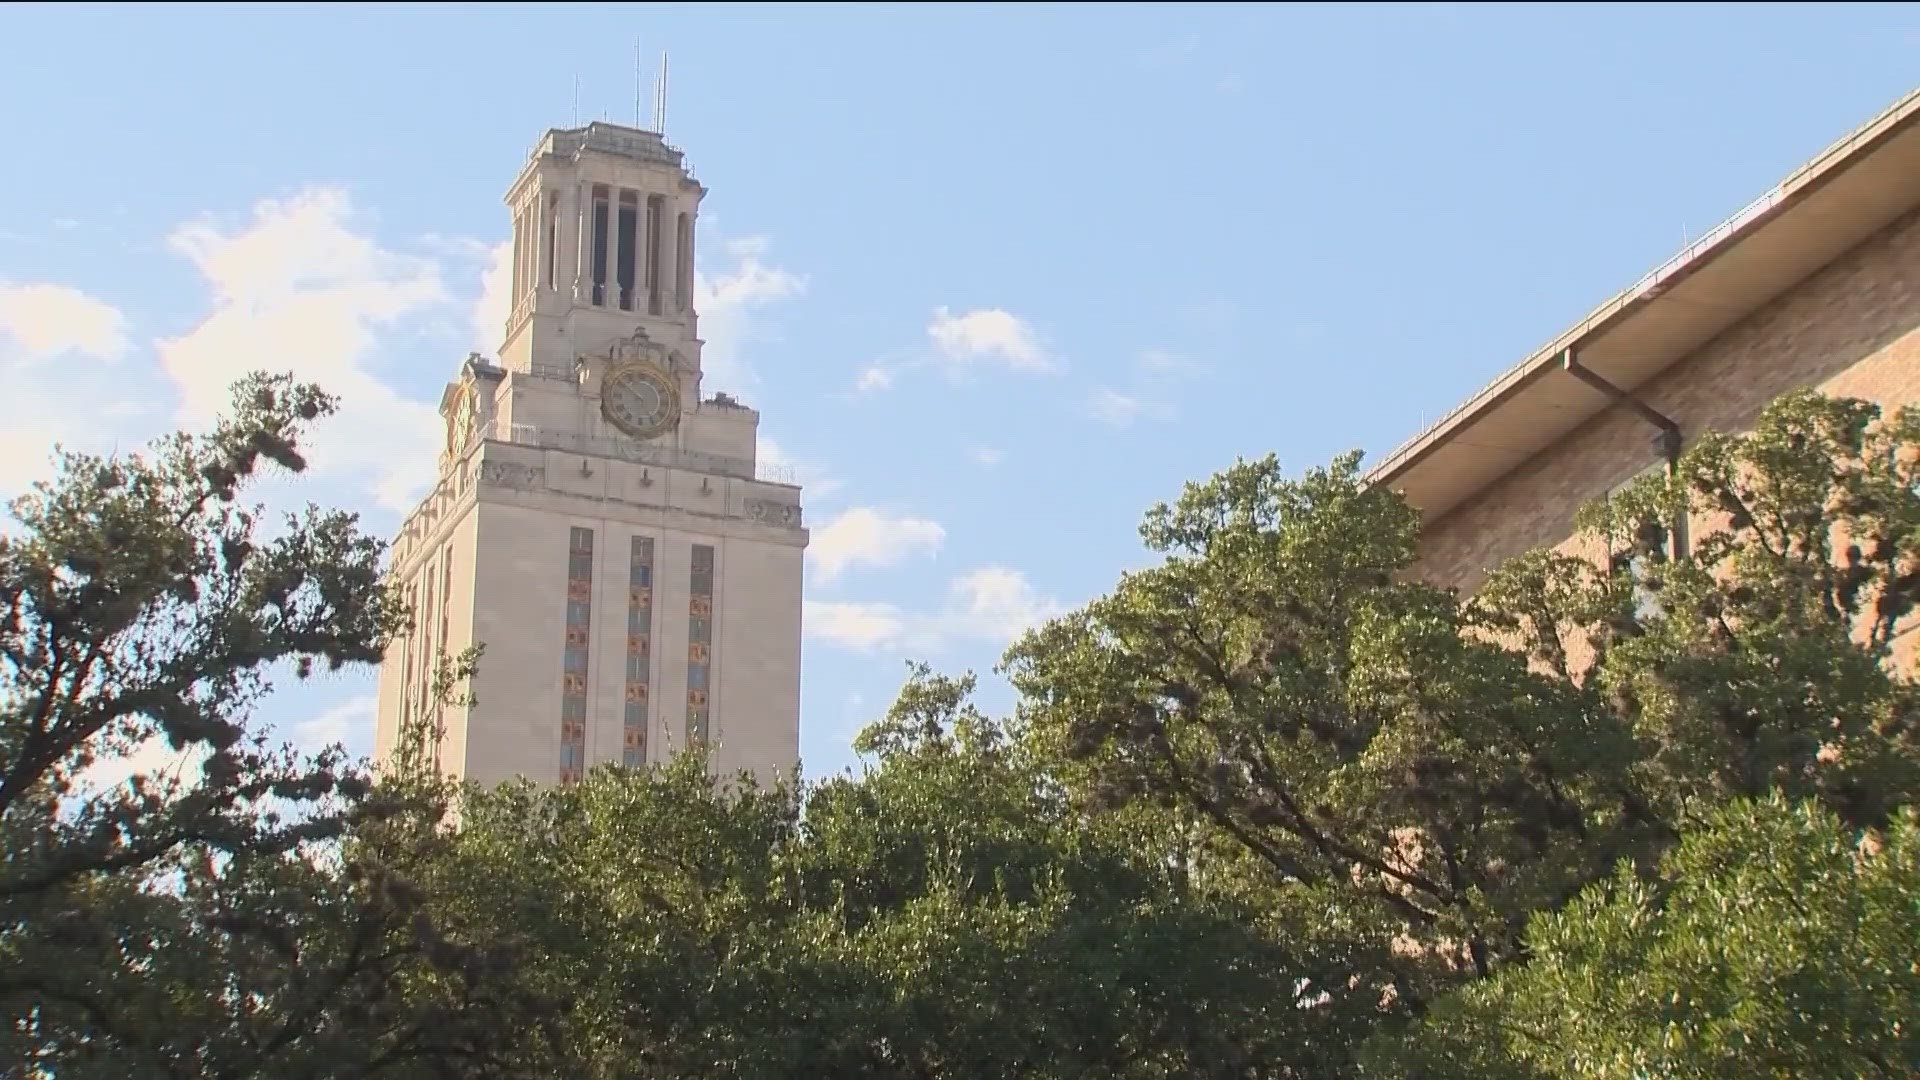 Reports of antisemitic vandalism at UT Austin come on the heels of a new report that hatred and extremism have been growing in Texas.